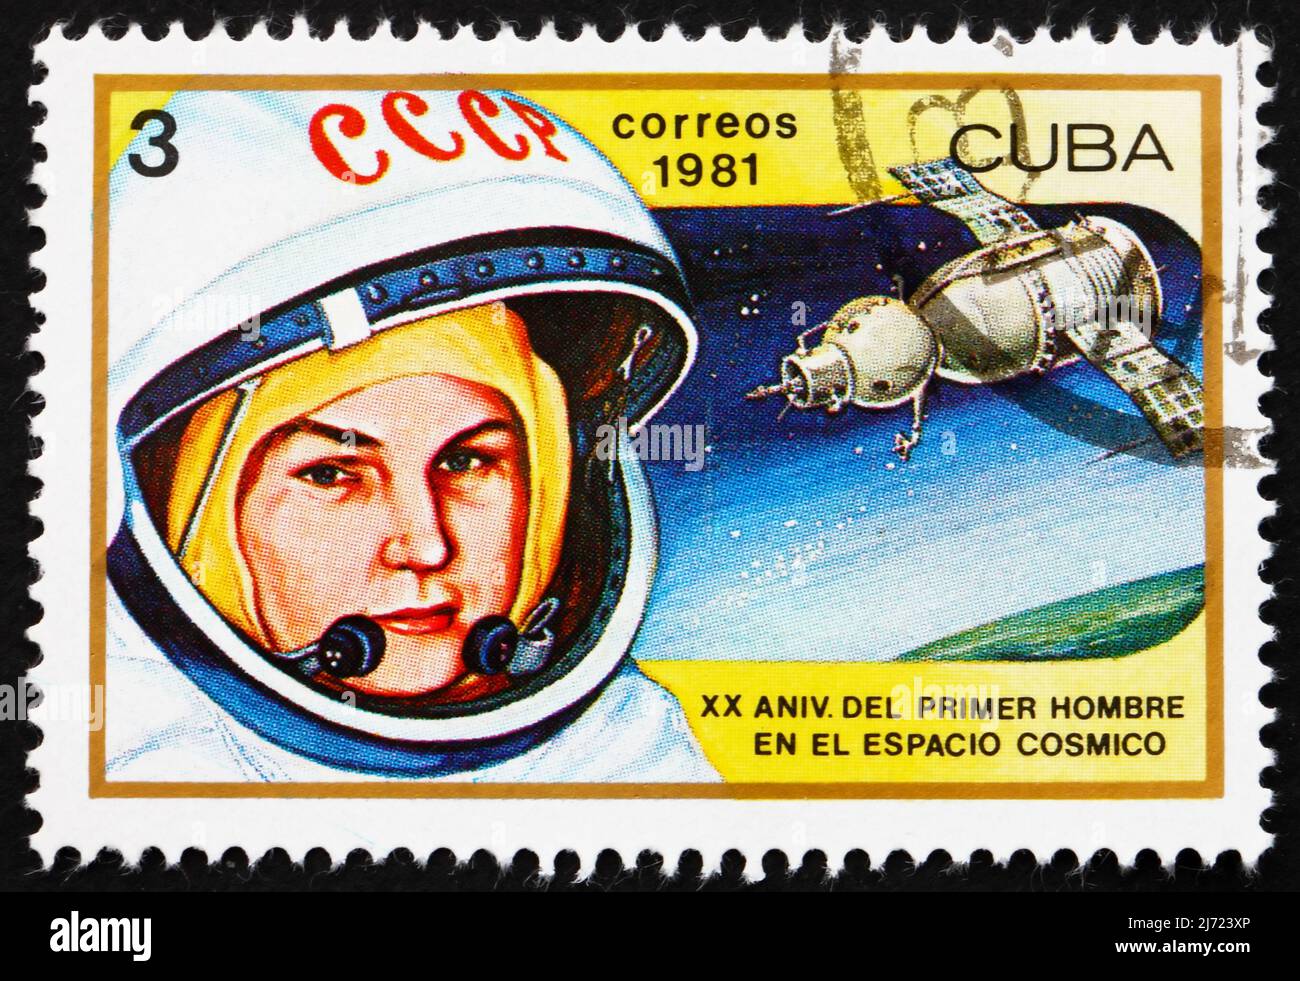 CUBA - CIRCA 1981: a stamp printed in the Cuba shows Valentina Tereshkova, 1st Woman in Space and Vostok 6, 20th Anniversary of 1st Man in Space, circ Stock Photo